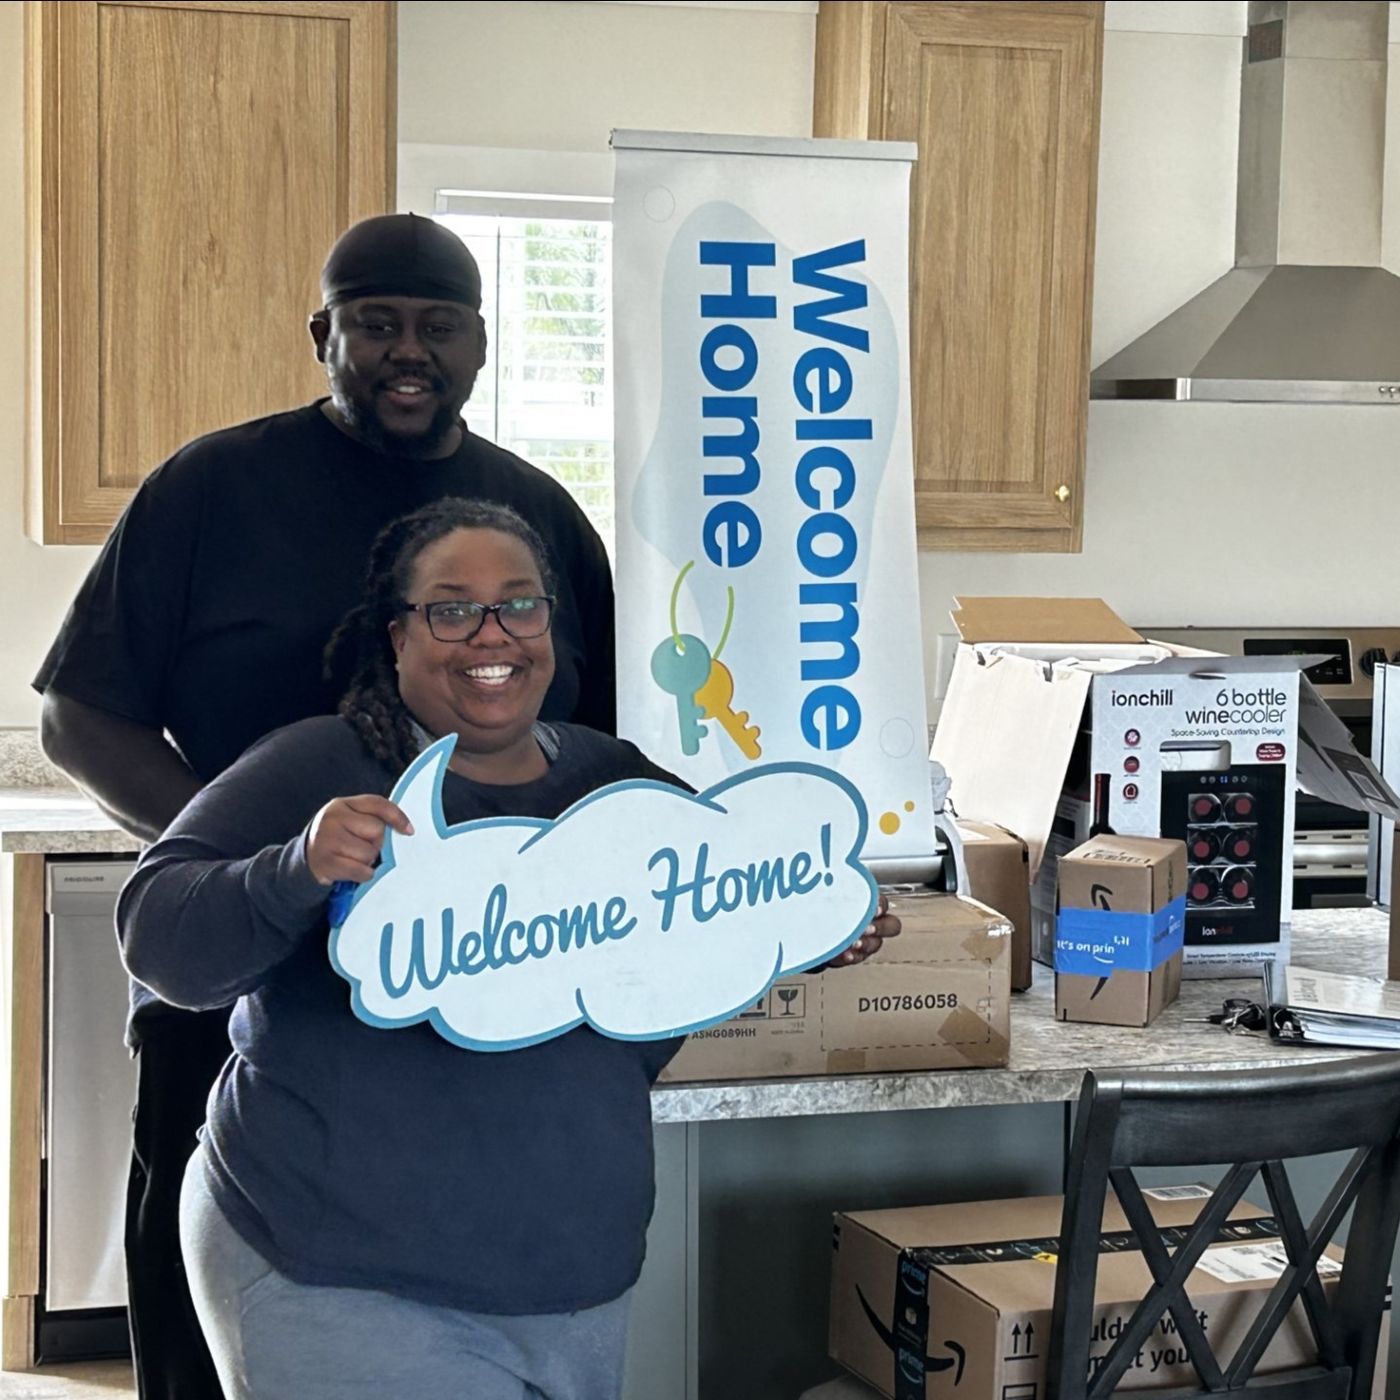 Diane K. welcome home image